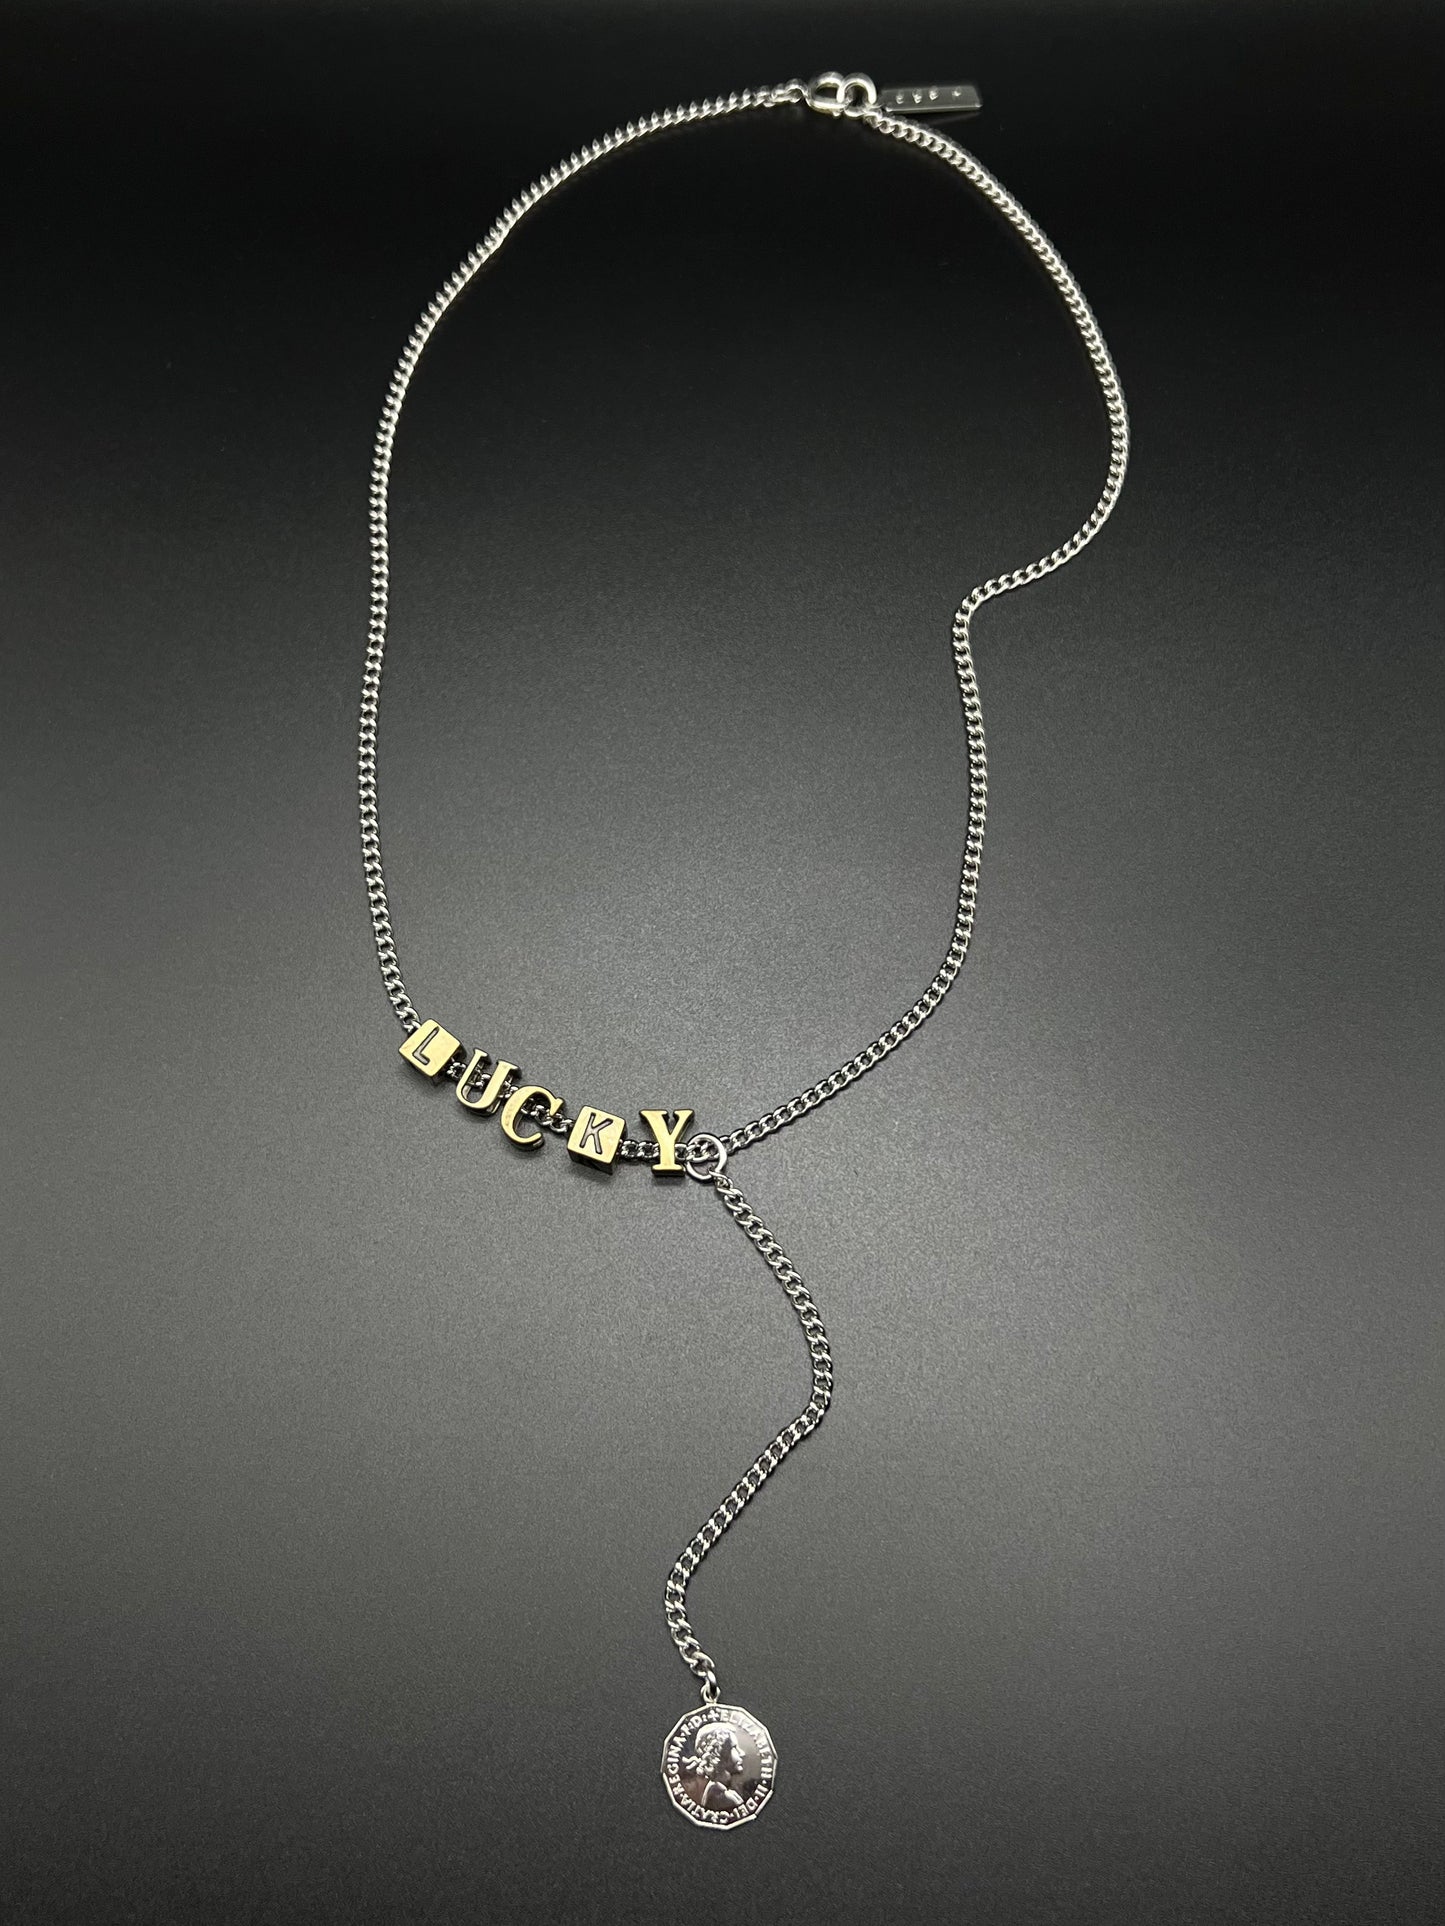 1212 "LUCKY"necklace